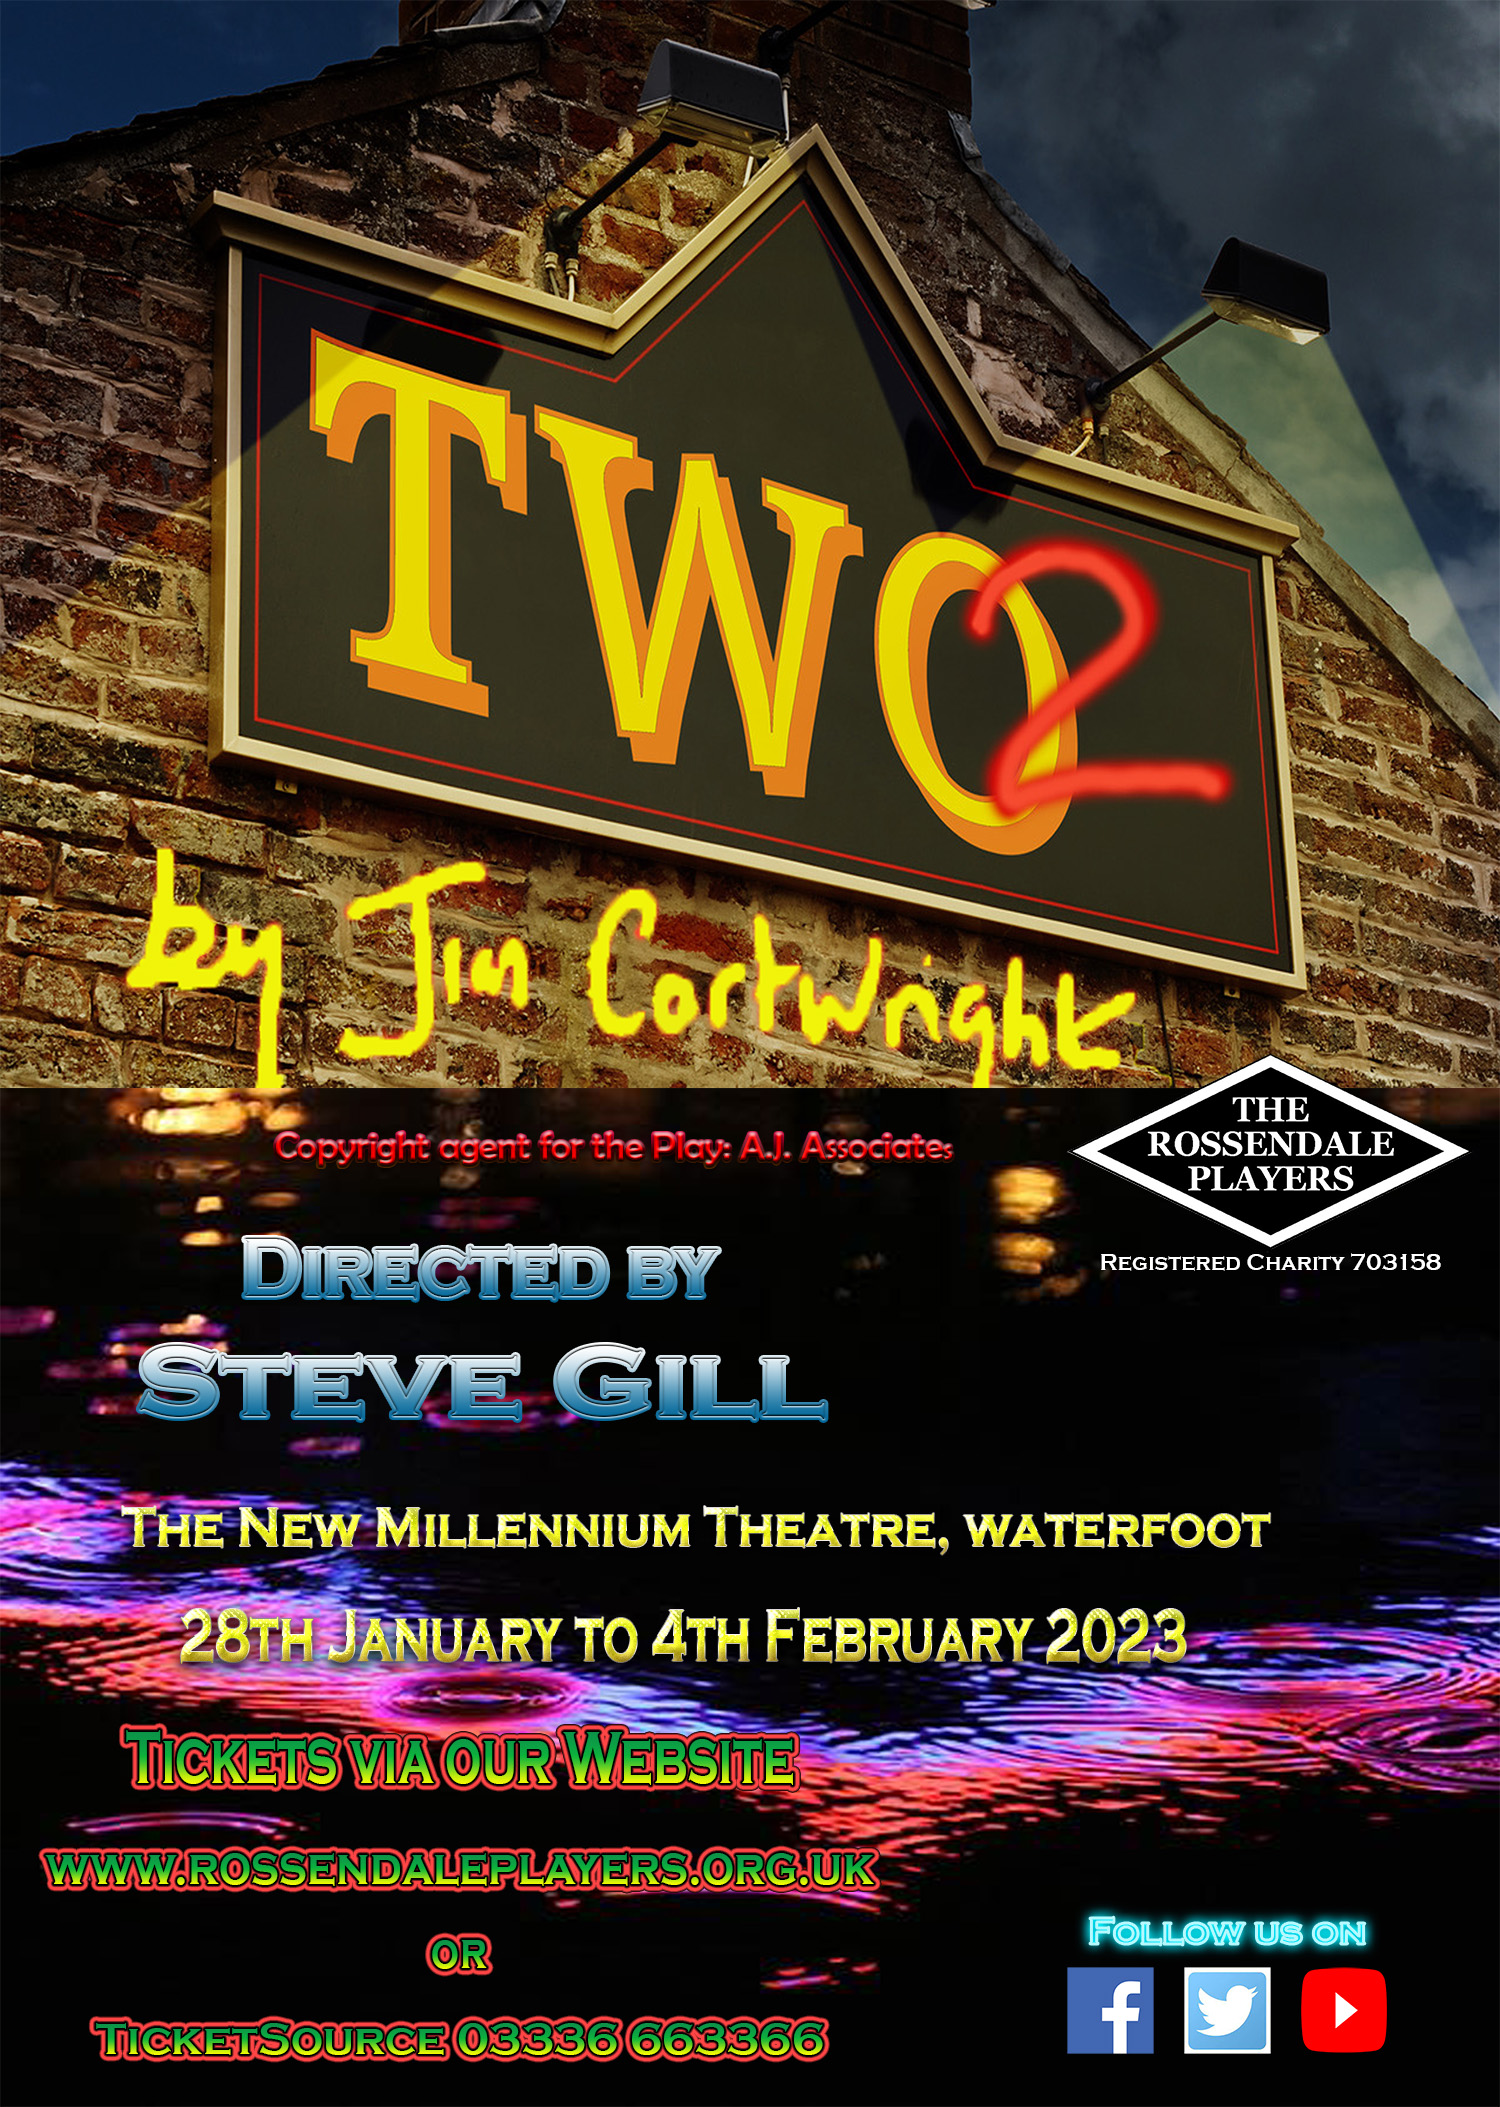 Appraisal for ‘Two2’ by Jim Cartwright, January 2023 - Suzanne Hall